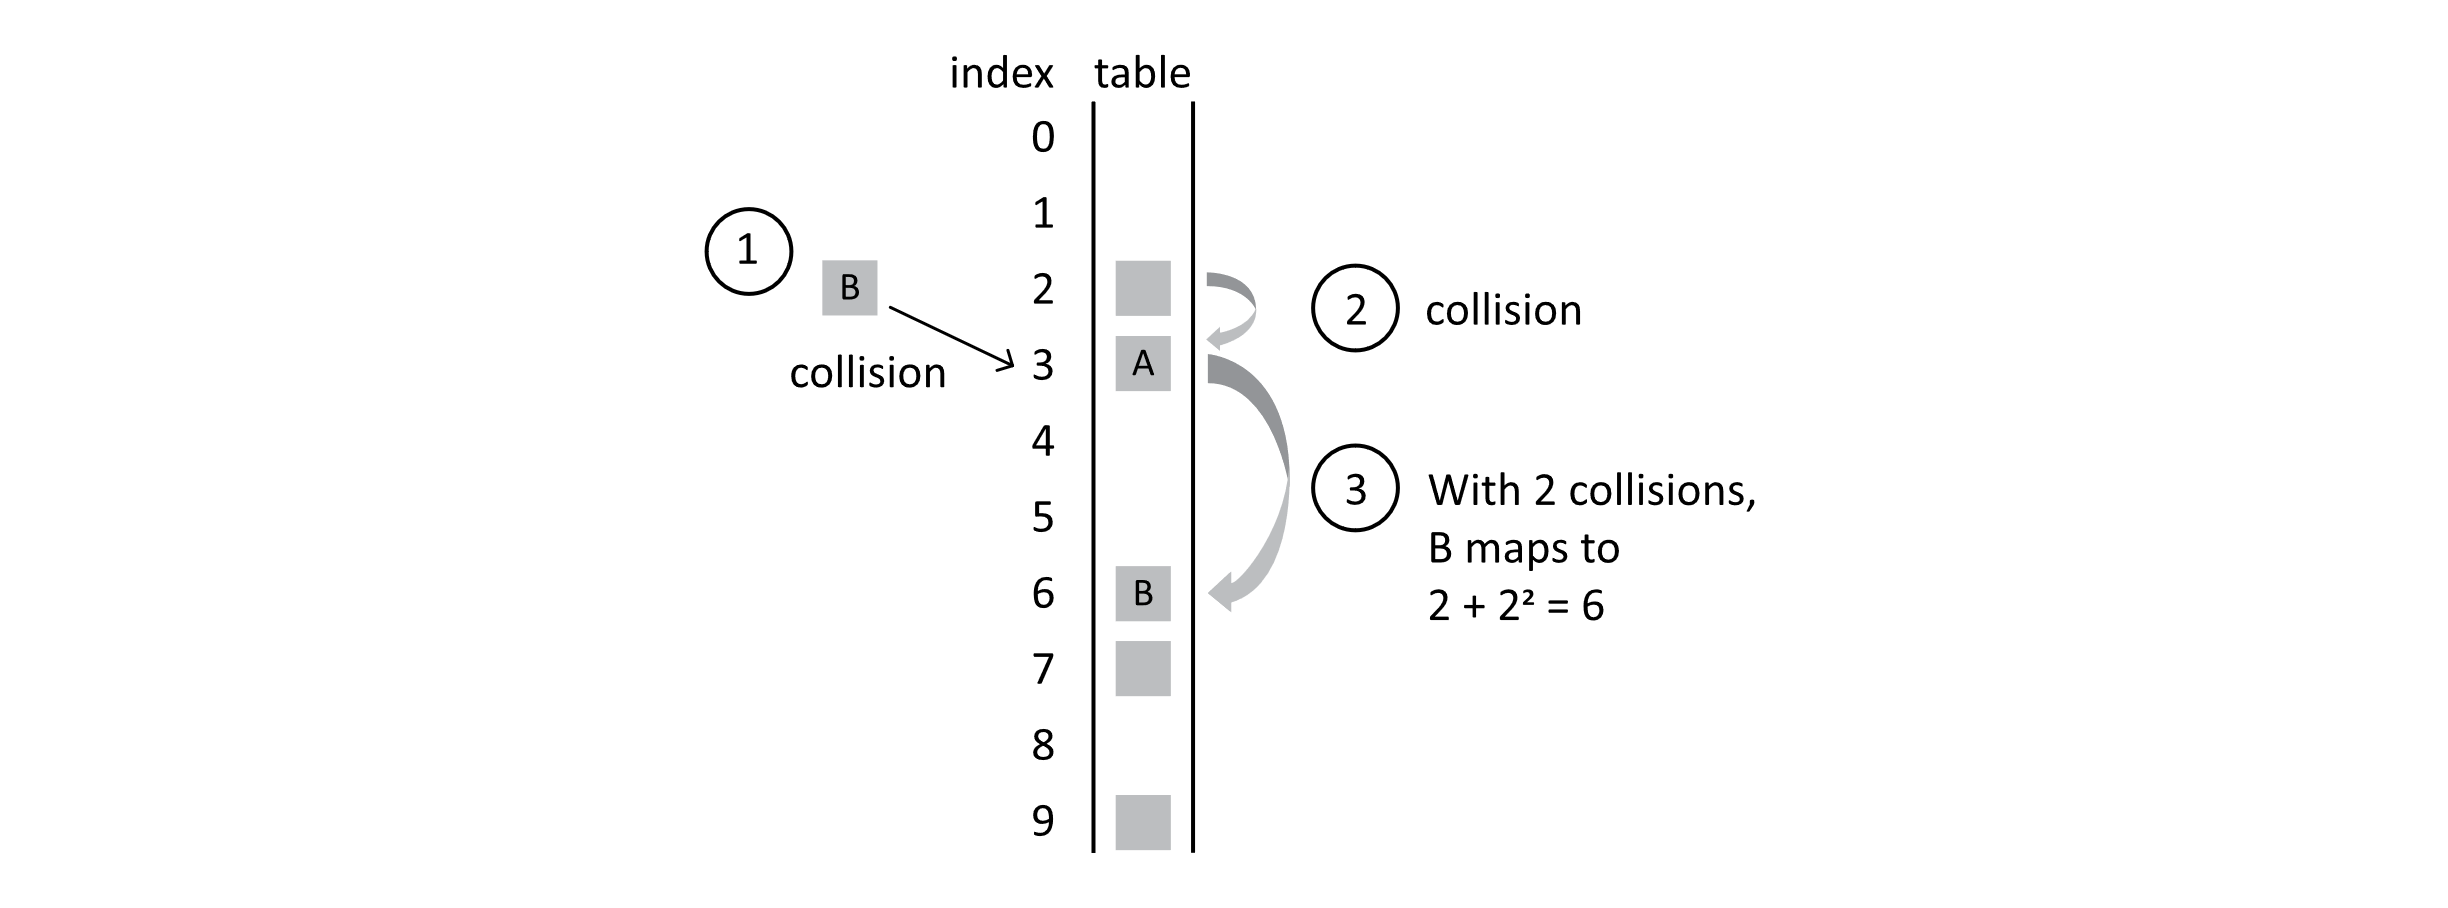 B is inserted and collides at position 2. Quadratice probing generates a differnt probe sequence putting B further away.